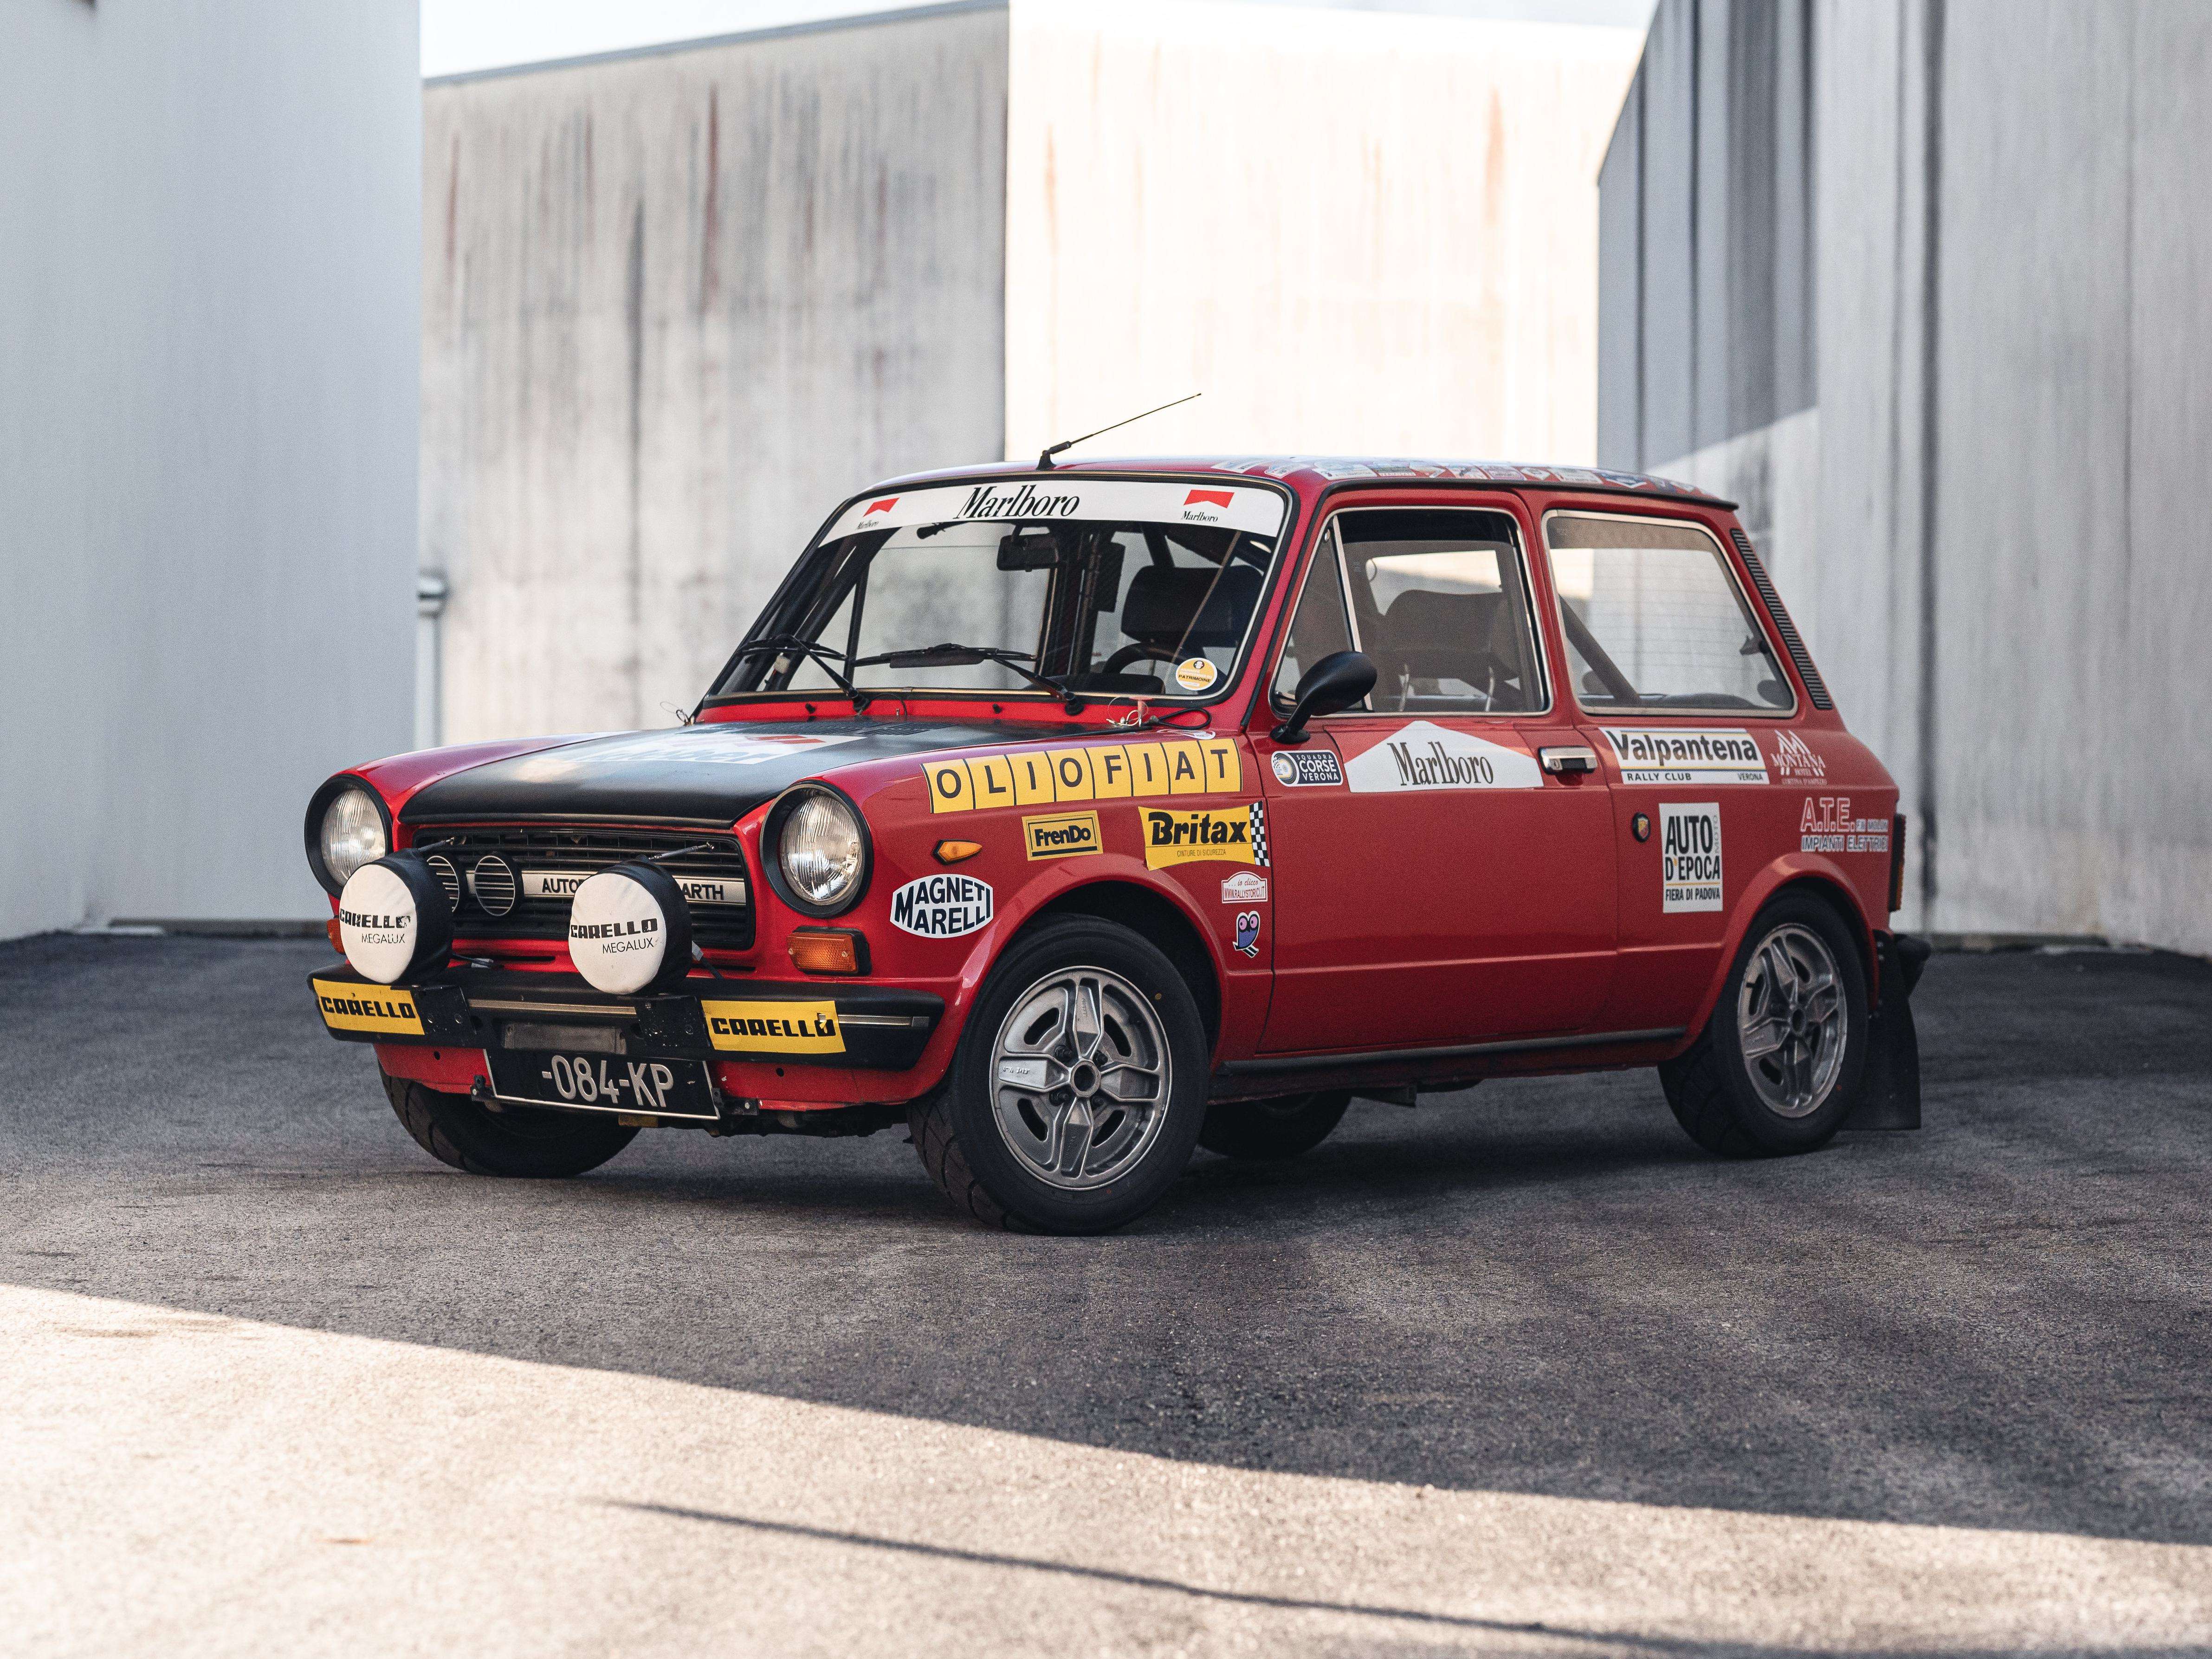 Autobianchi A 112 Compact in Red used in Aix-en-Provence for € 24,000.-